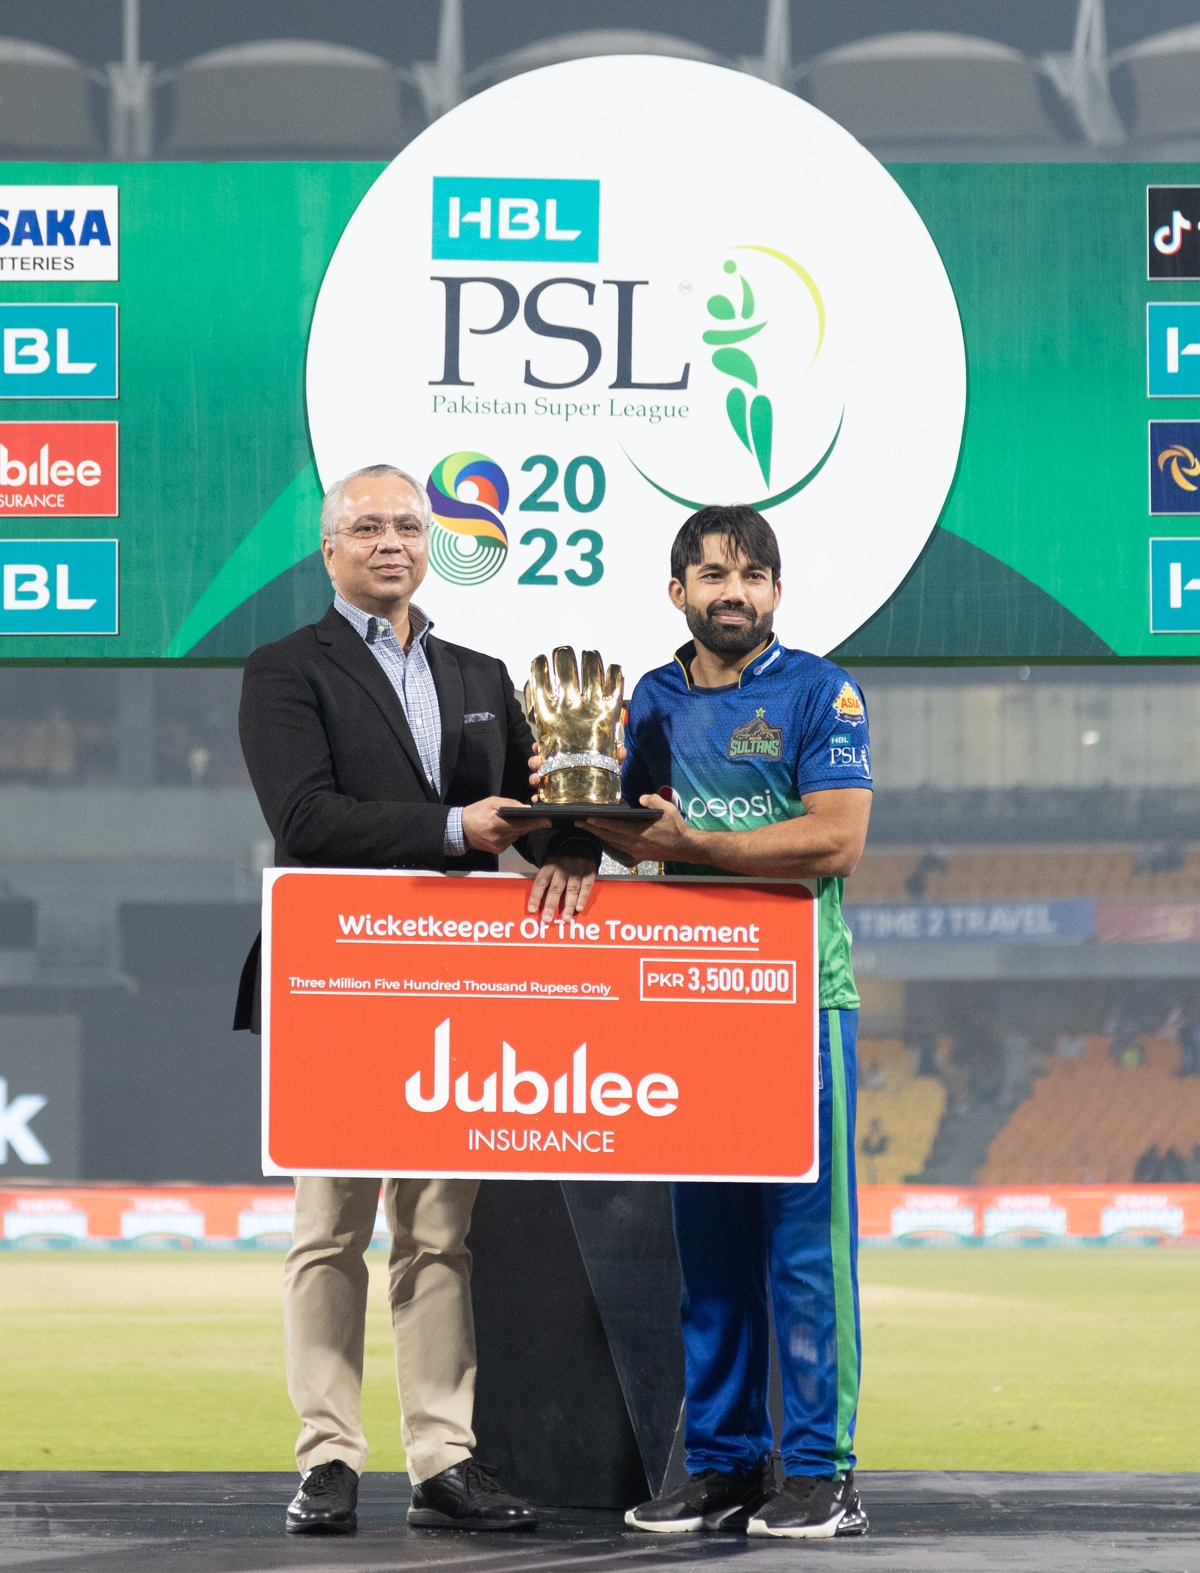 Kashif Naqvi, Group Head Technology and Project Management, Jubilee Life Insurance presenting the Wicketkeeper of the Tournament Award to Muhammad Rizwan after HBL PSL 2023 final match between Lahore Qalandars and Multan Sultans.